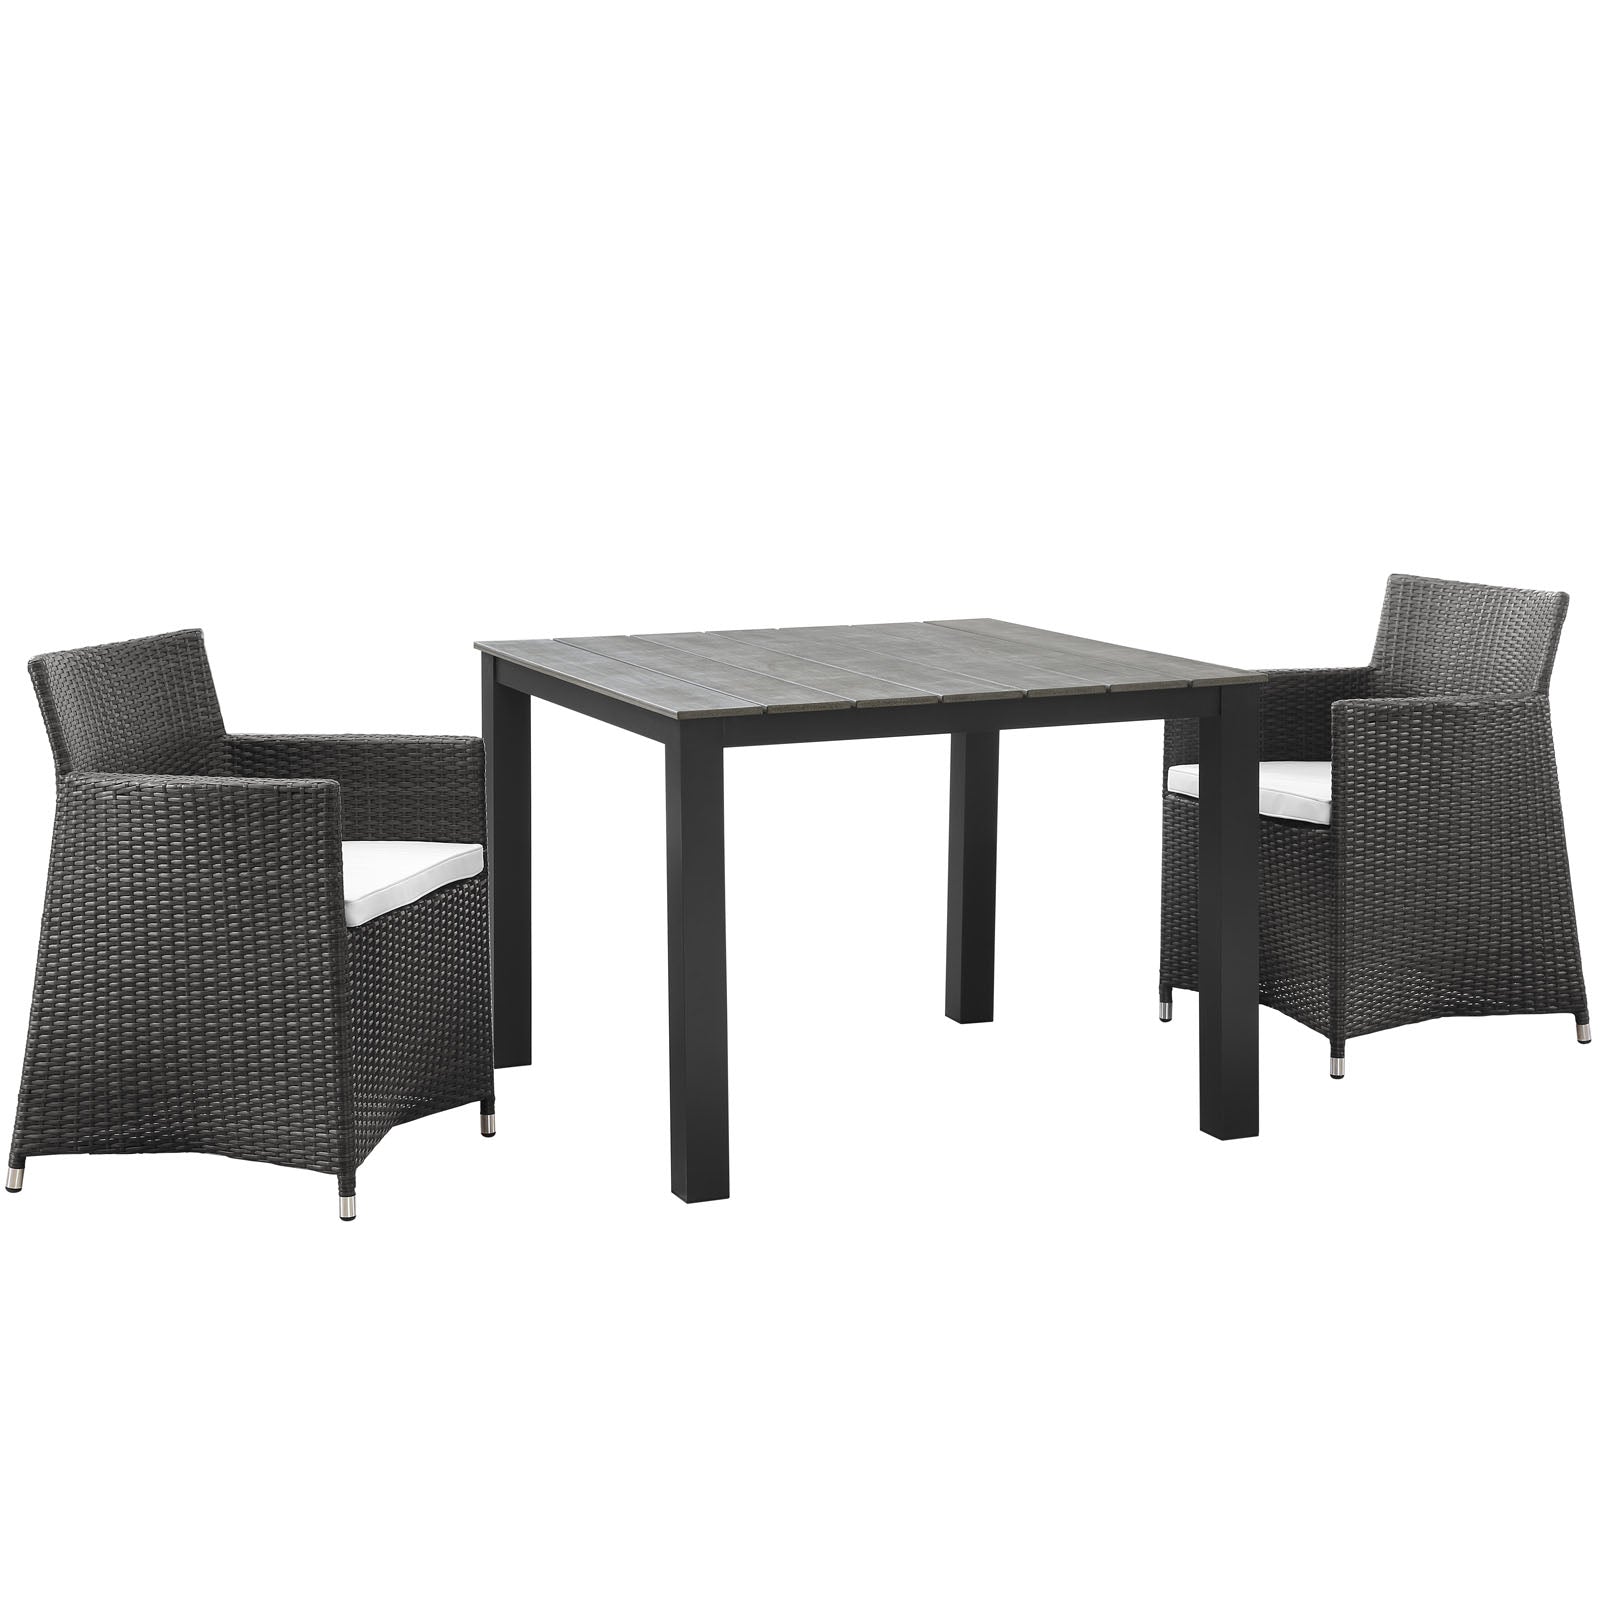 Modway Outdoor Dining Sets - Junction 3 Piece Outdoor Patio Wicker Dining Set Brown White